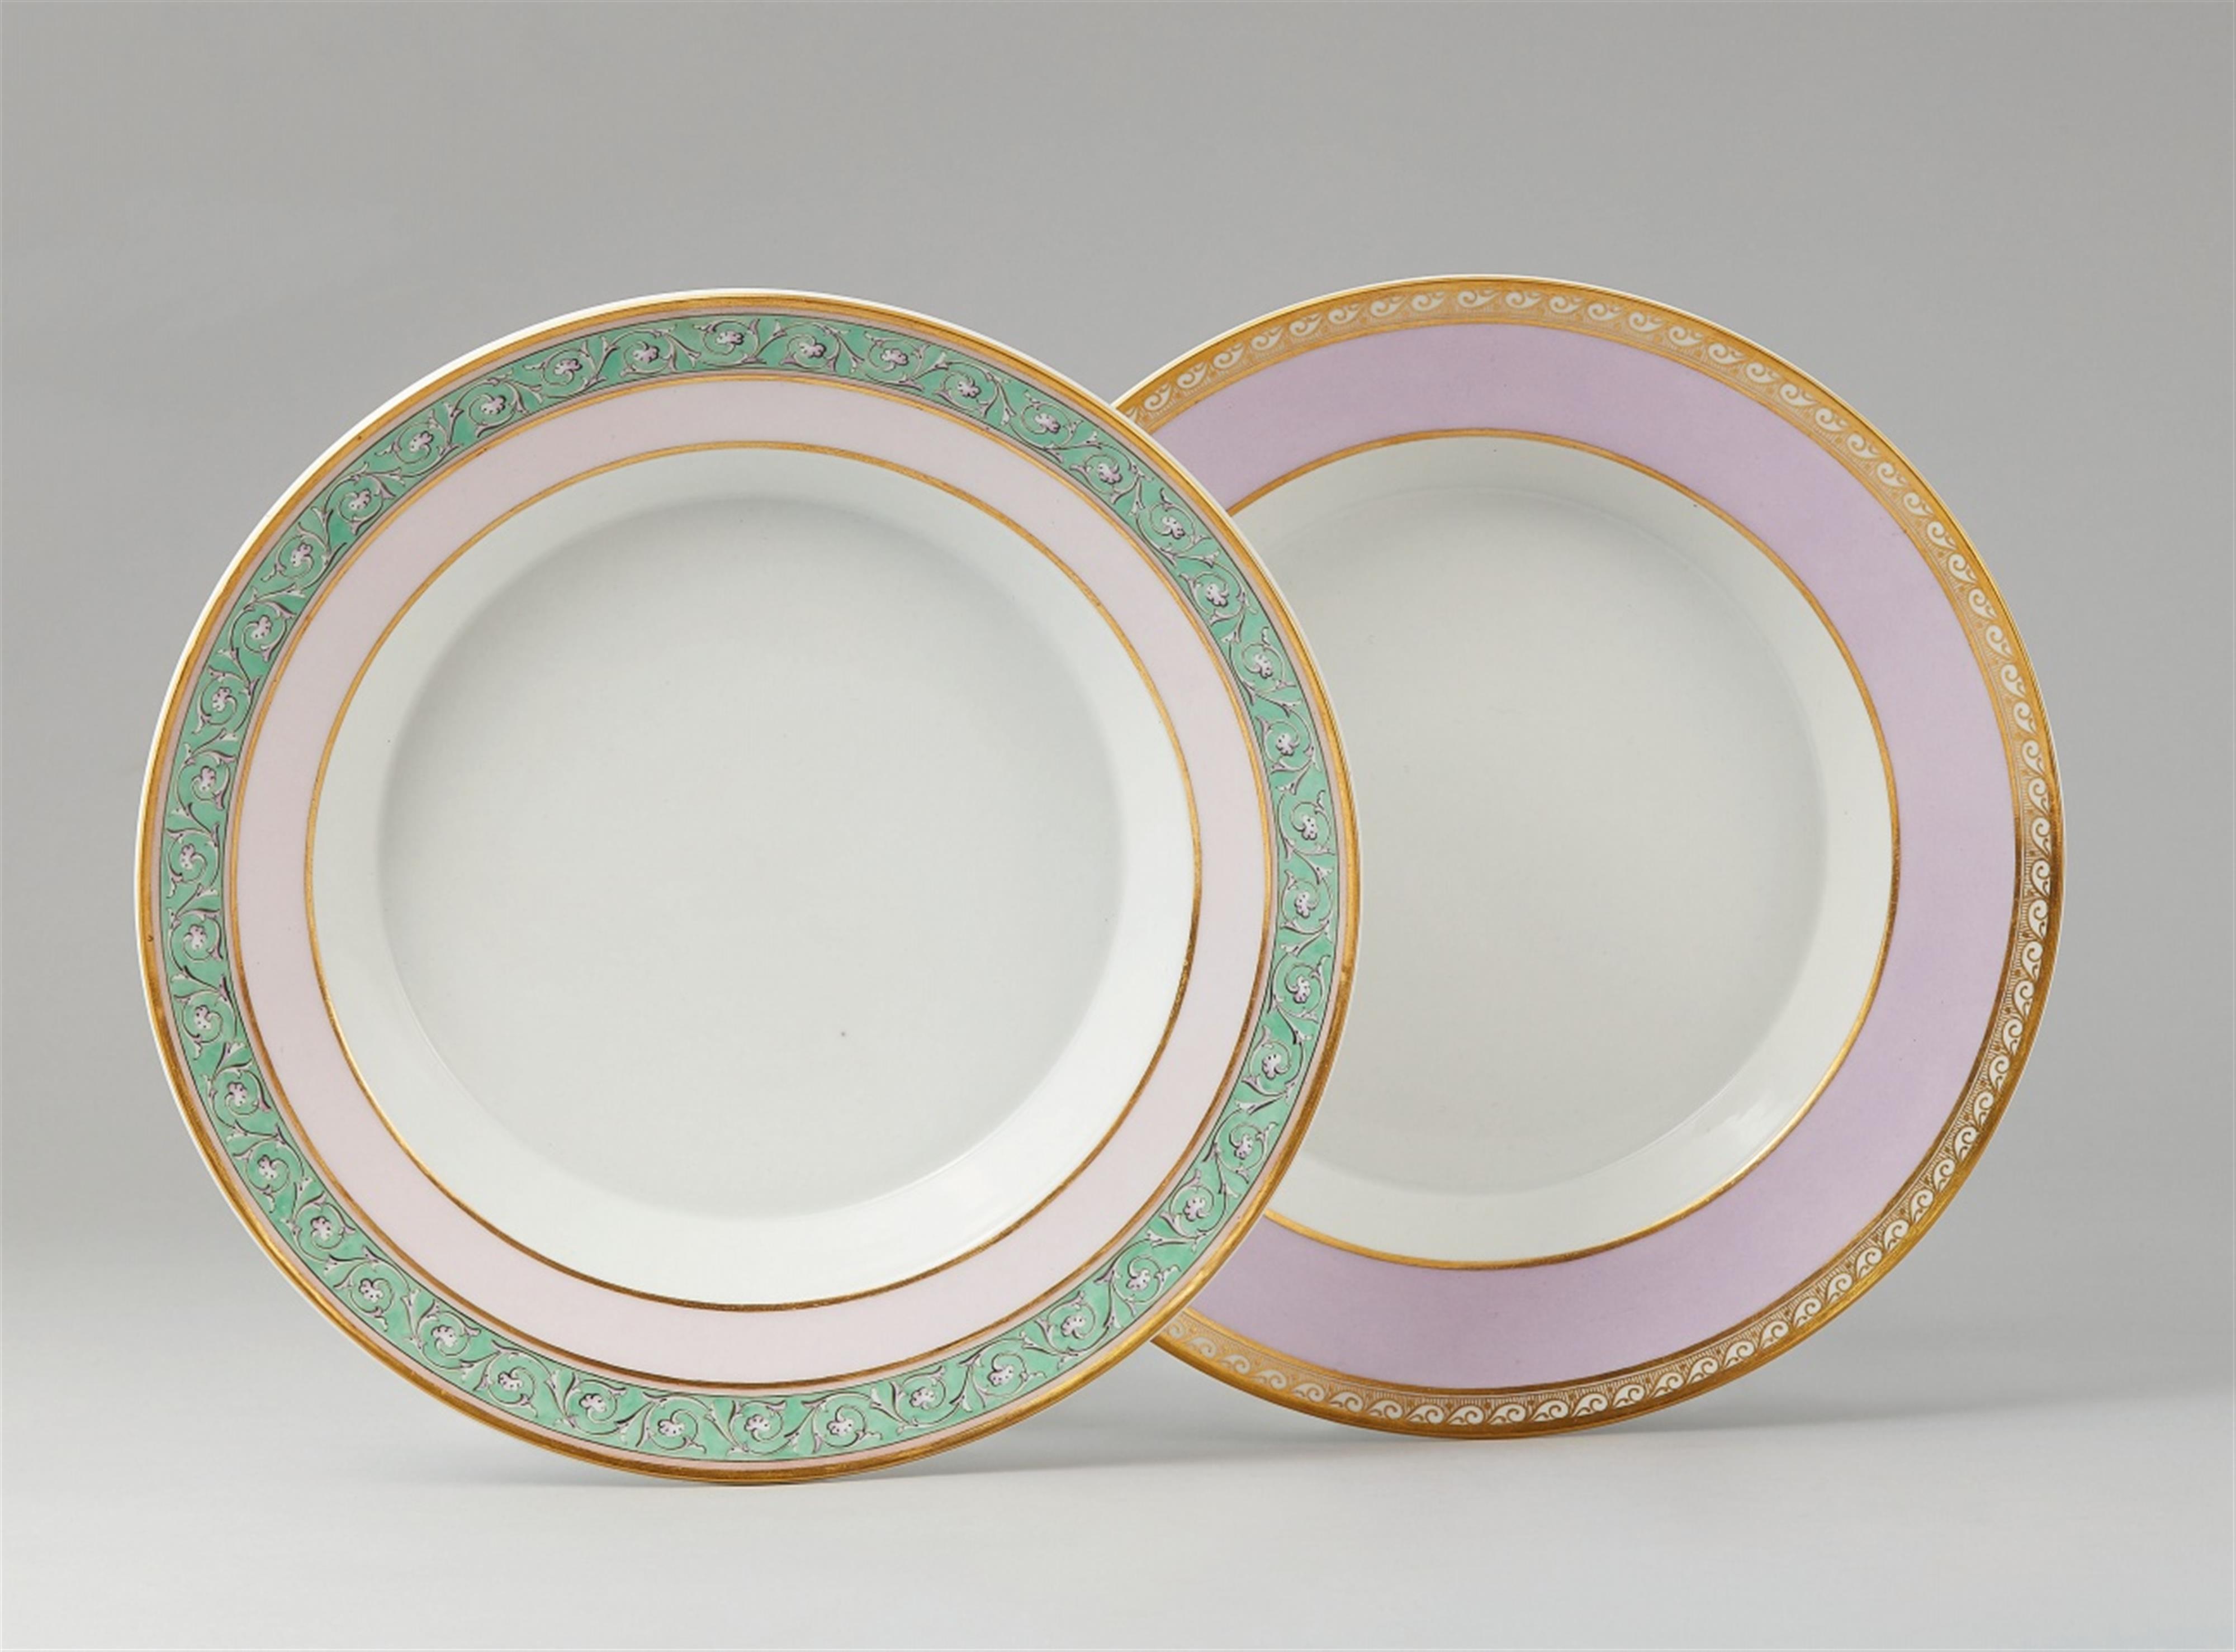 Two Berlin KPM porcelain plates with tendrils and pink striped decor - image-1